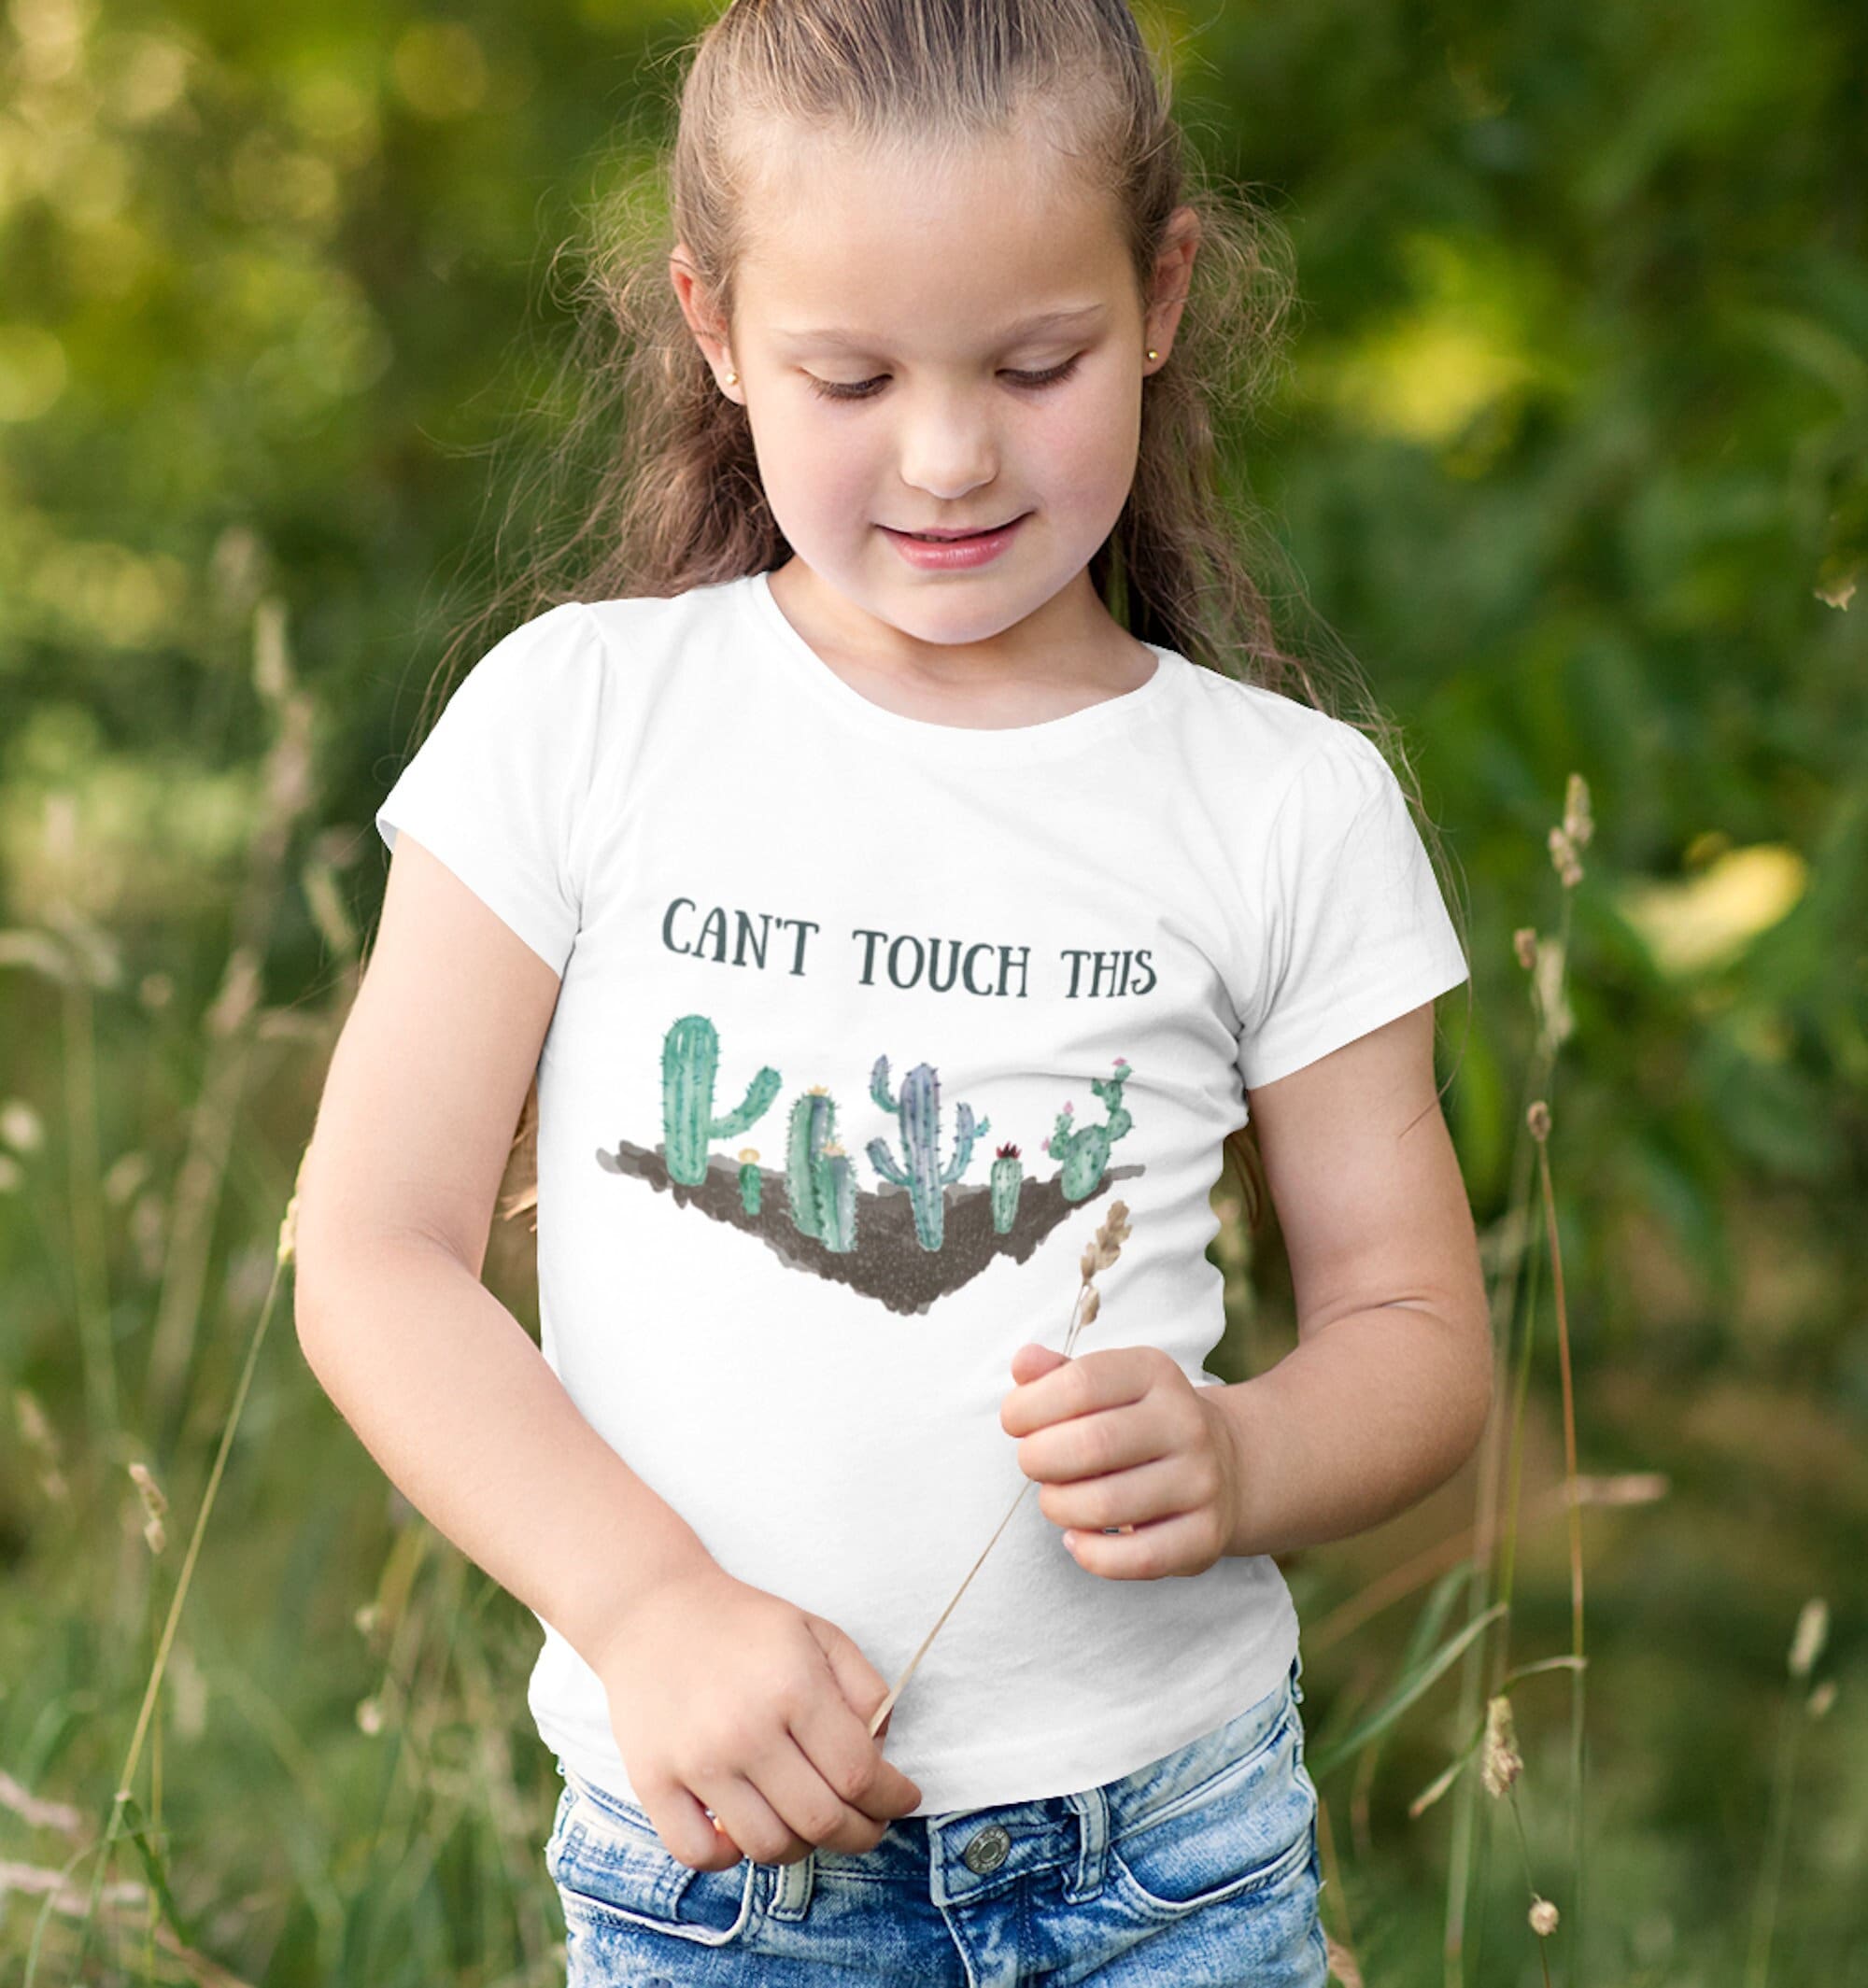 Cute Succulant Unisex Kids Clothing. Can't Touch This Kids Tee